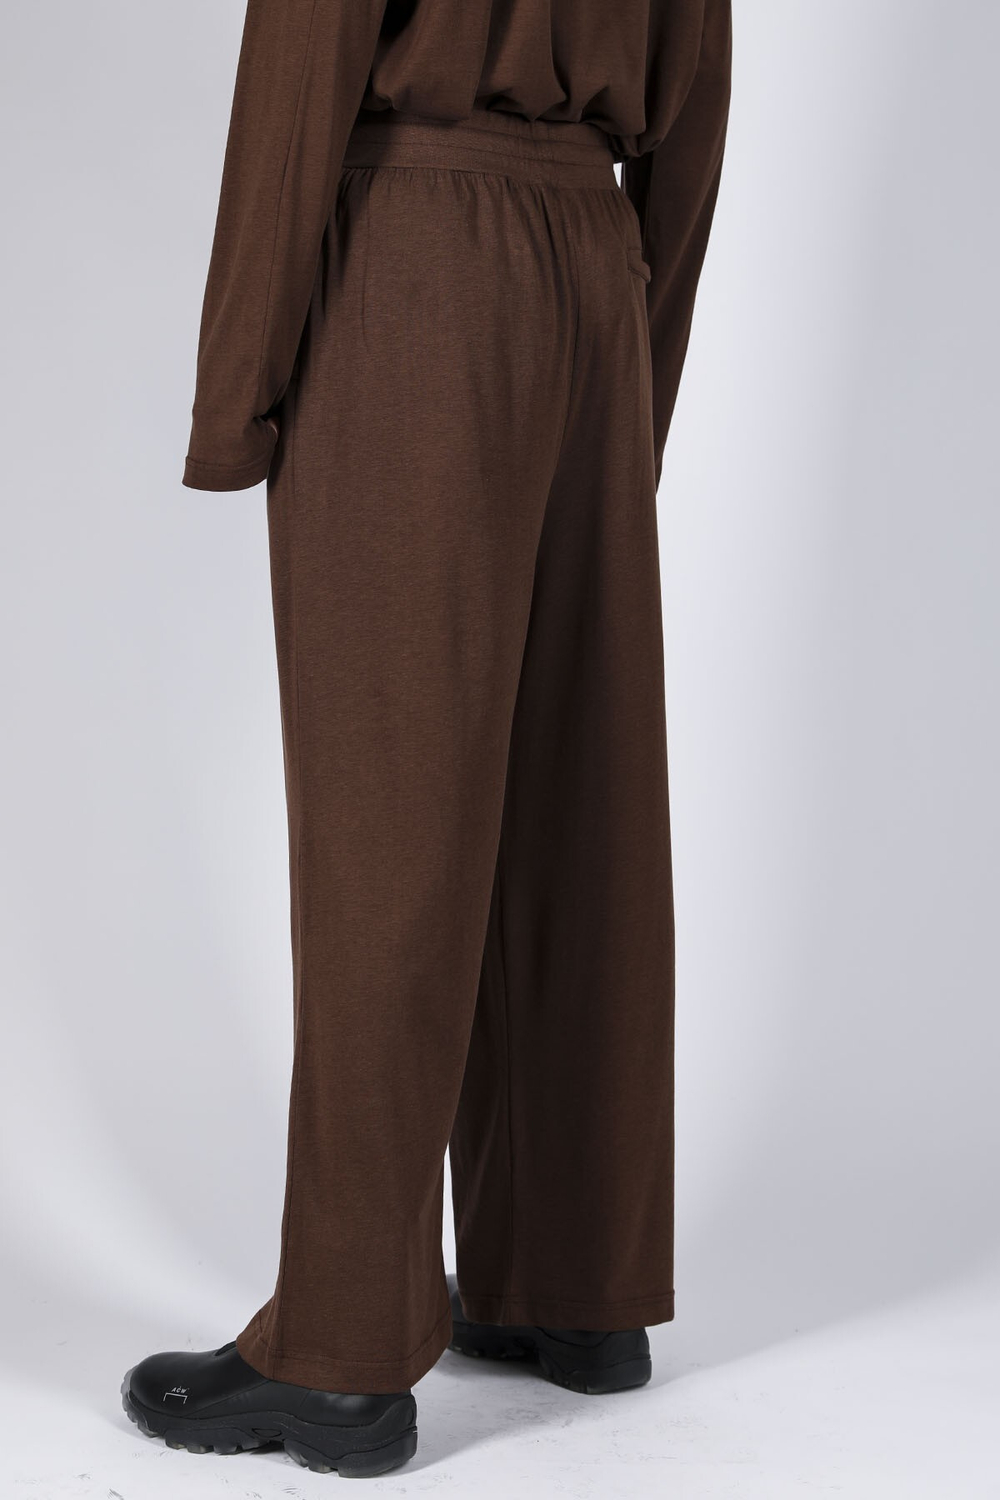 A-COLD-WALL ESSENTIAL SYSTEM LOUNGE BROWN PANTS